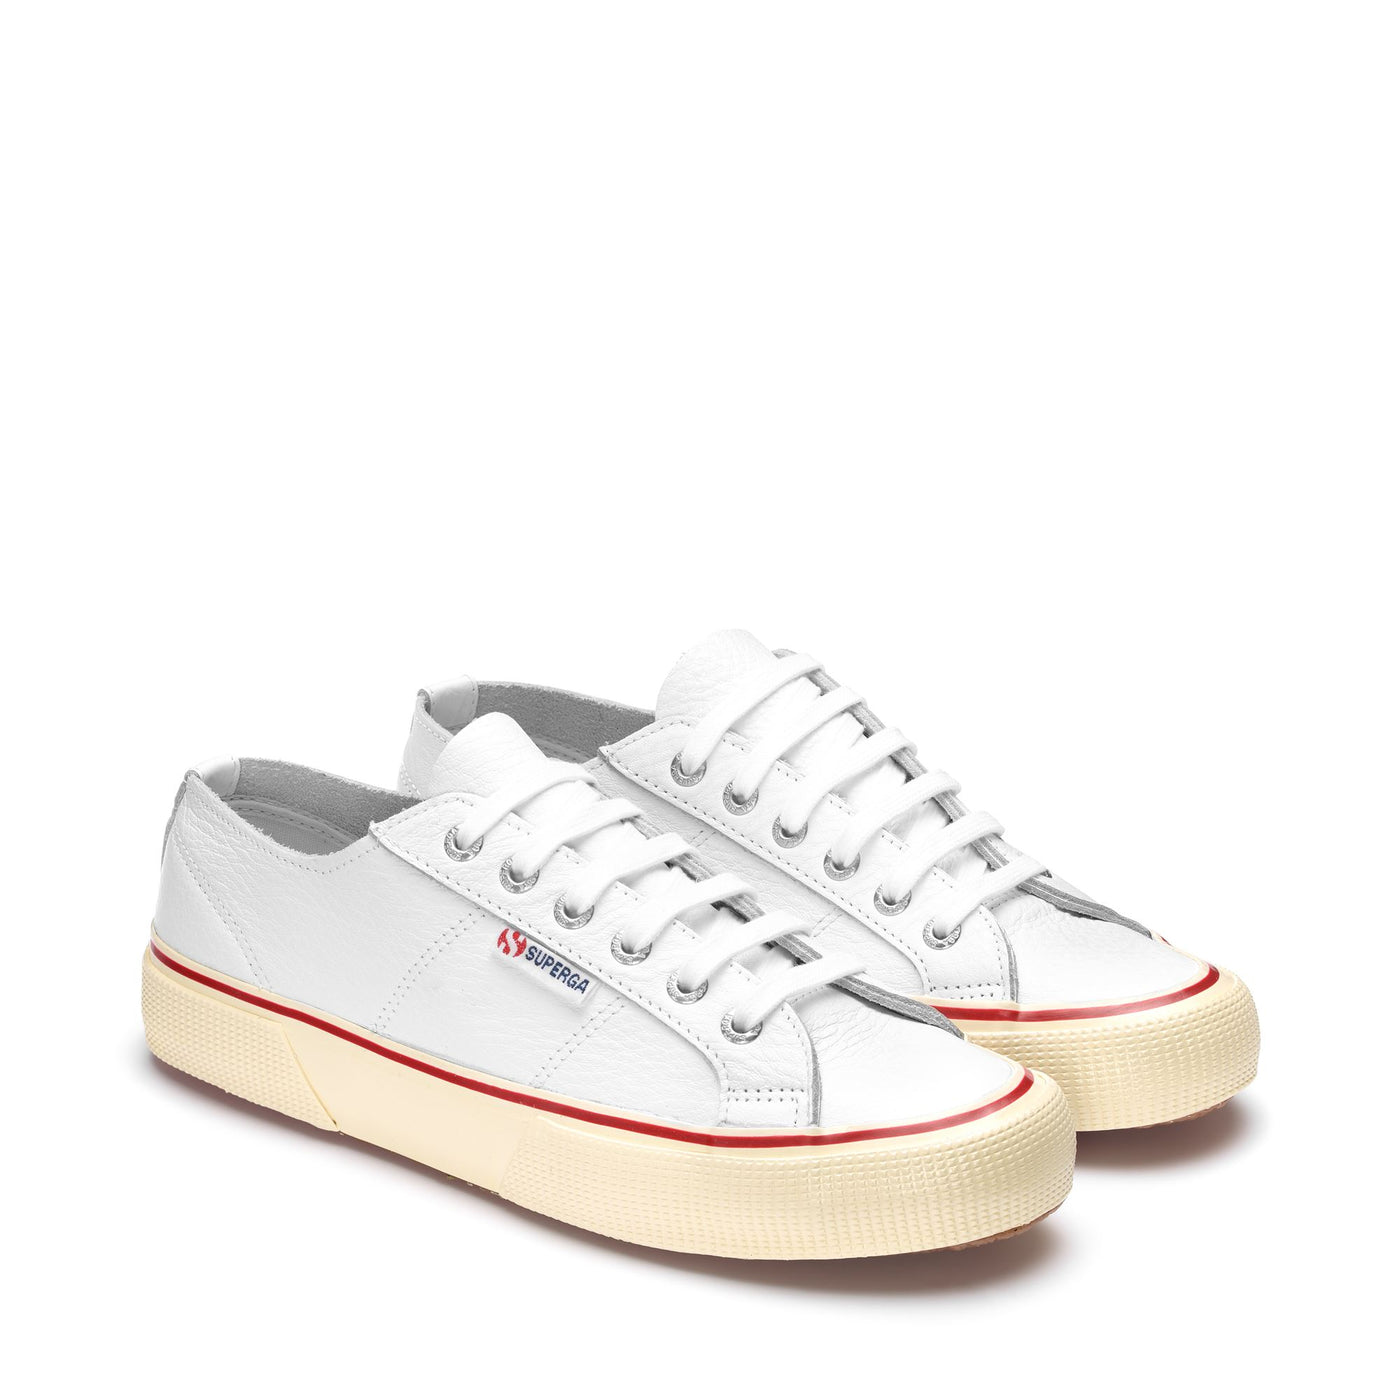 Le Superga Man 2490 BOLD SOFT TUMBLED LEATHER Sneaker WHITE-RED FLAME Dressed Front (jpg Rgb)	